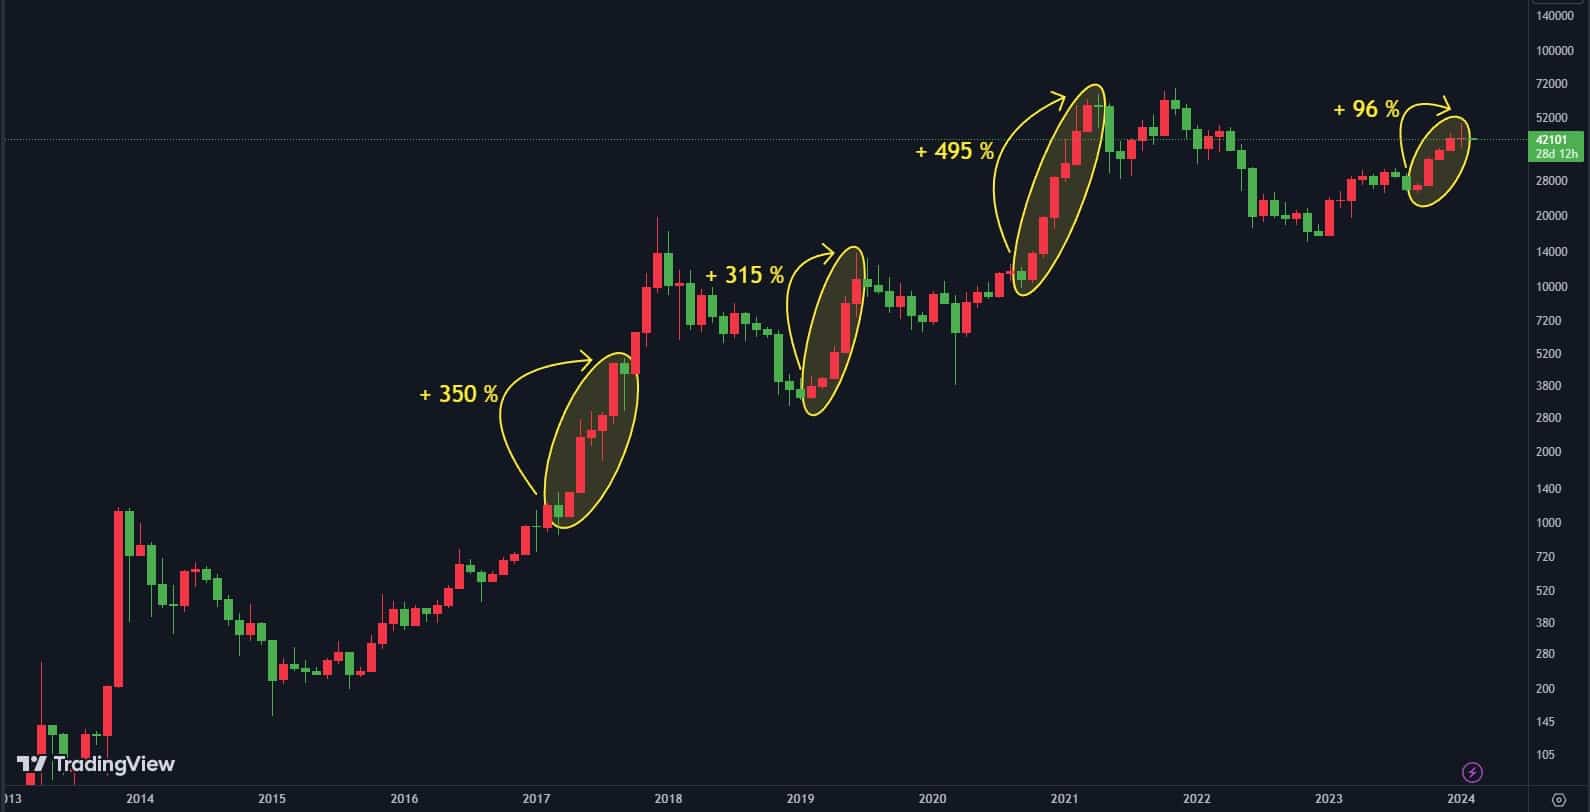 Bitcoin price showing periods of 5 consecutive months of rise